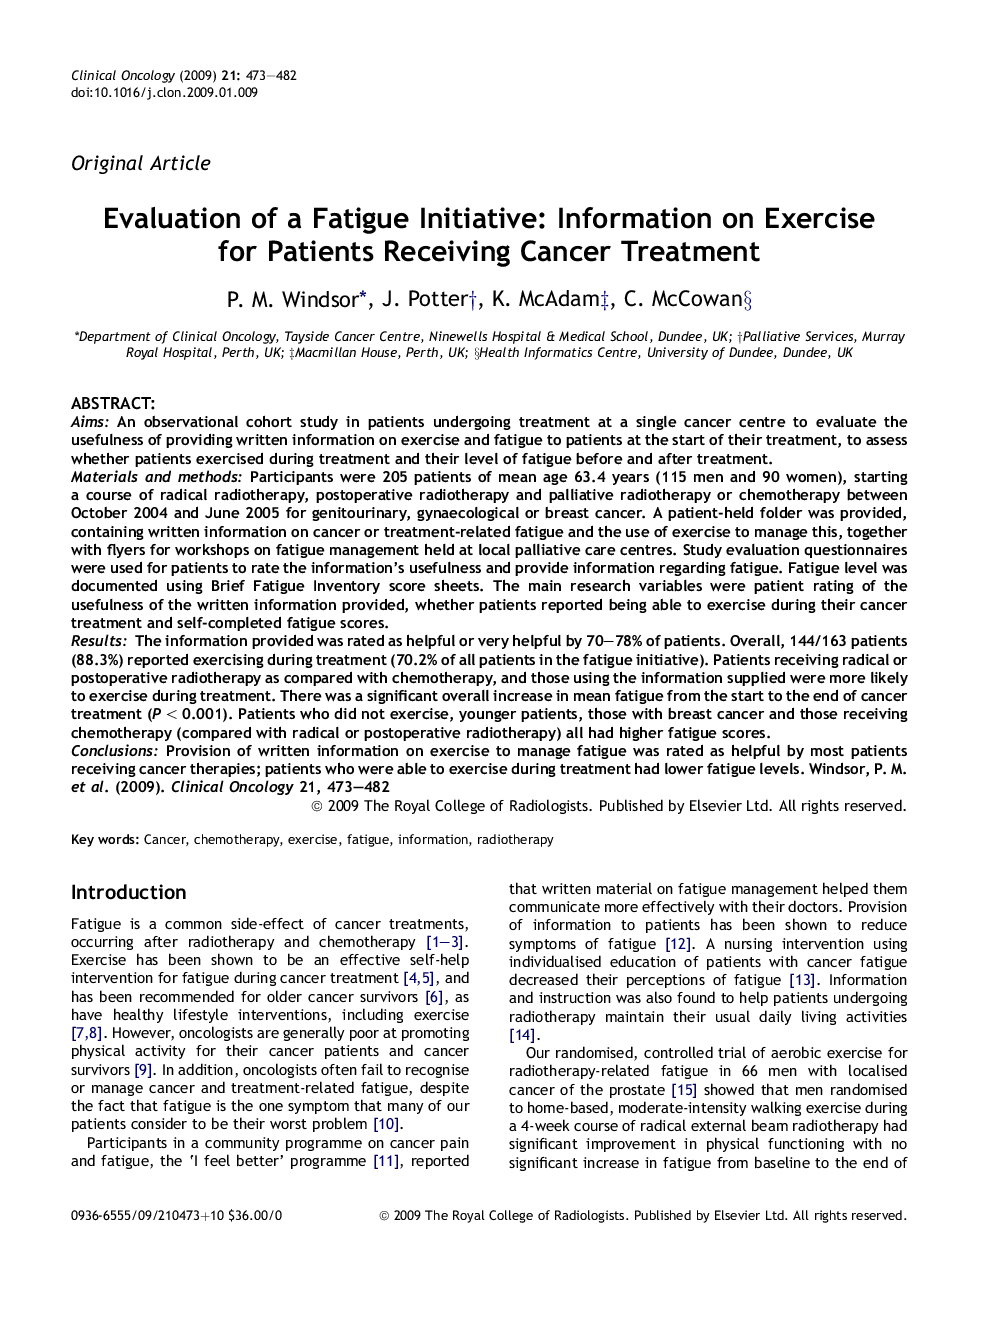 Evaluation of a Fatigue Initiative: Information on Exercise for Patients Receiving Cancer Treatment